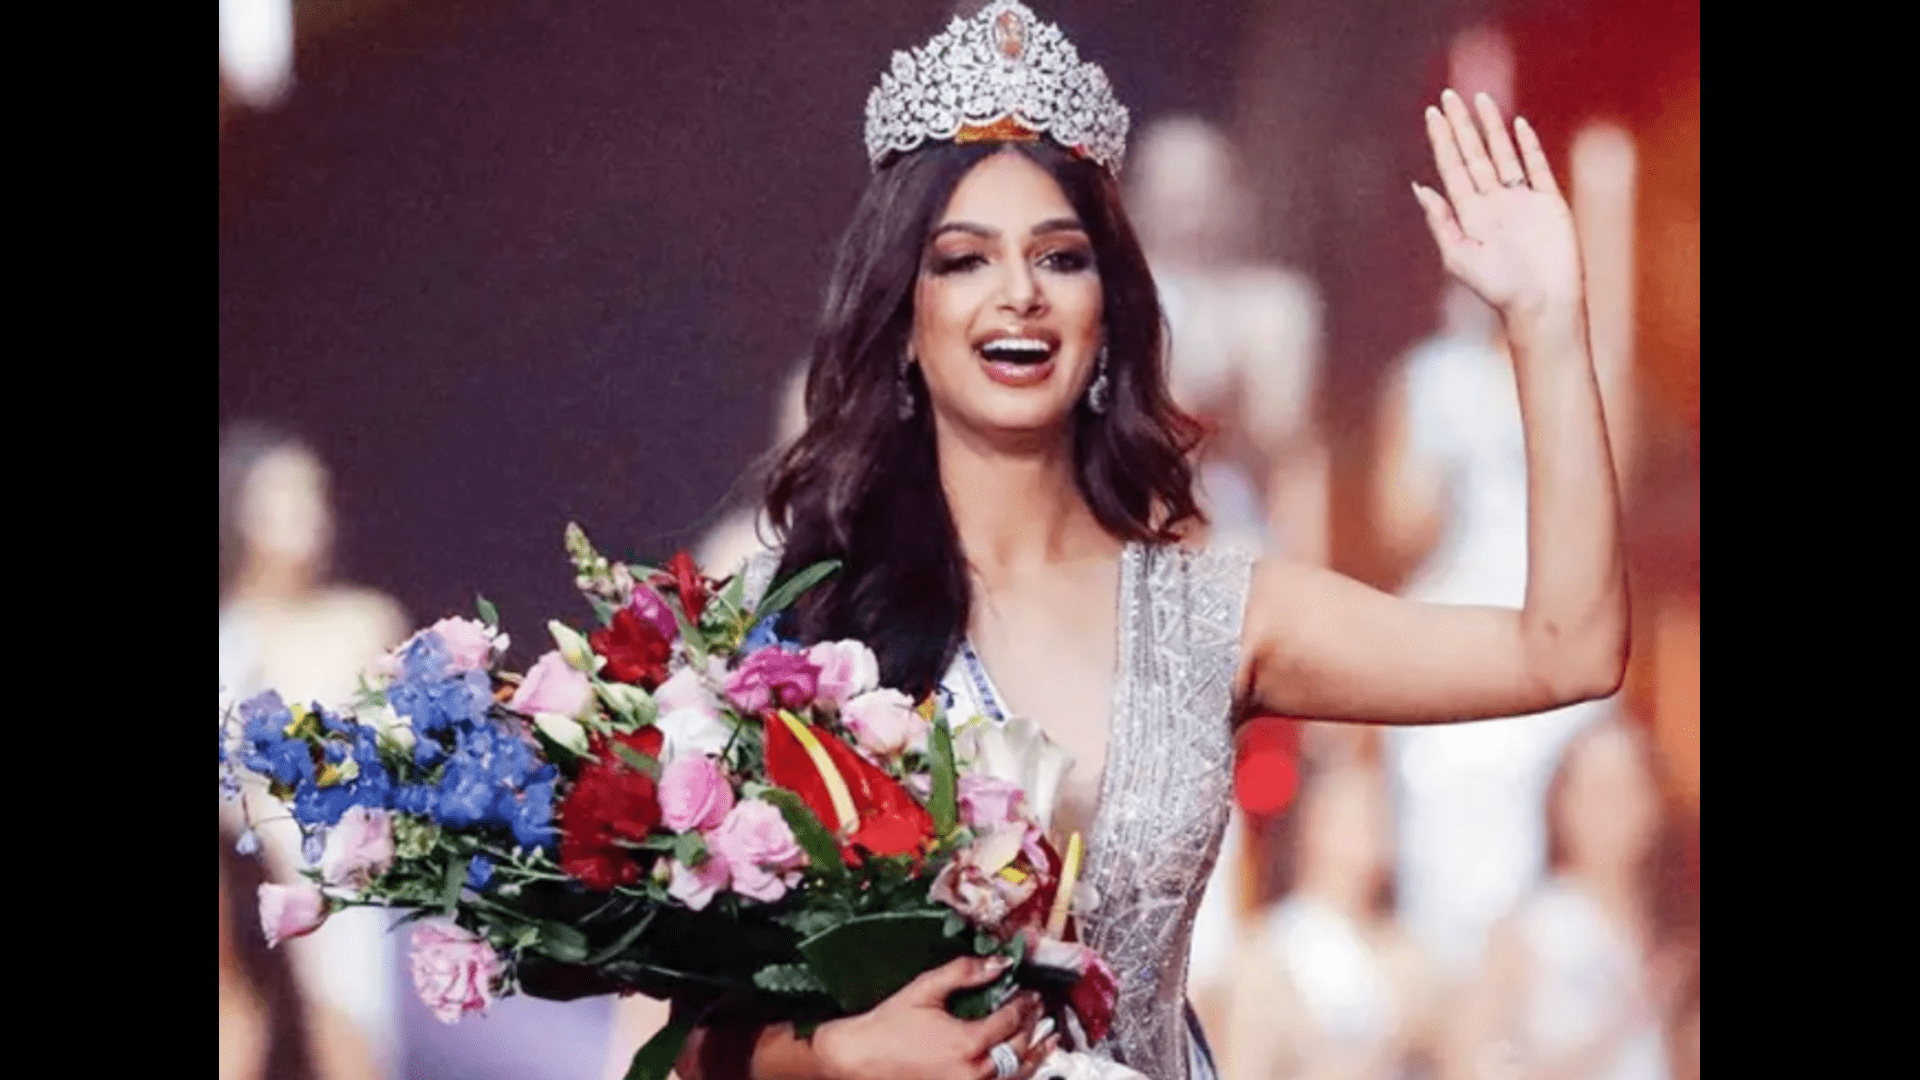 Miss Universe 2021 discusses the illness that drives her to gain weight